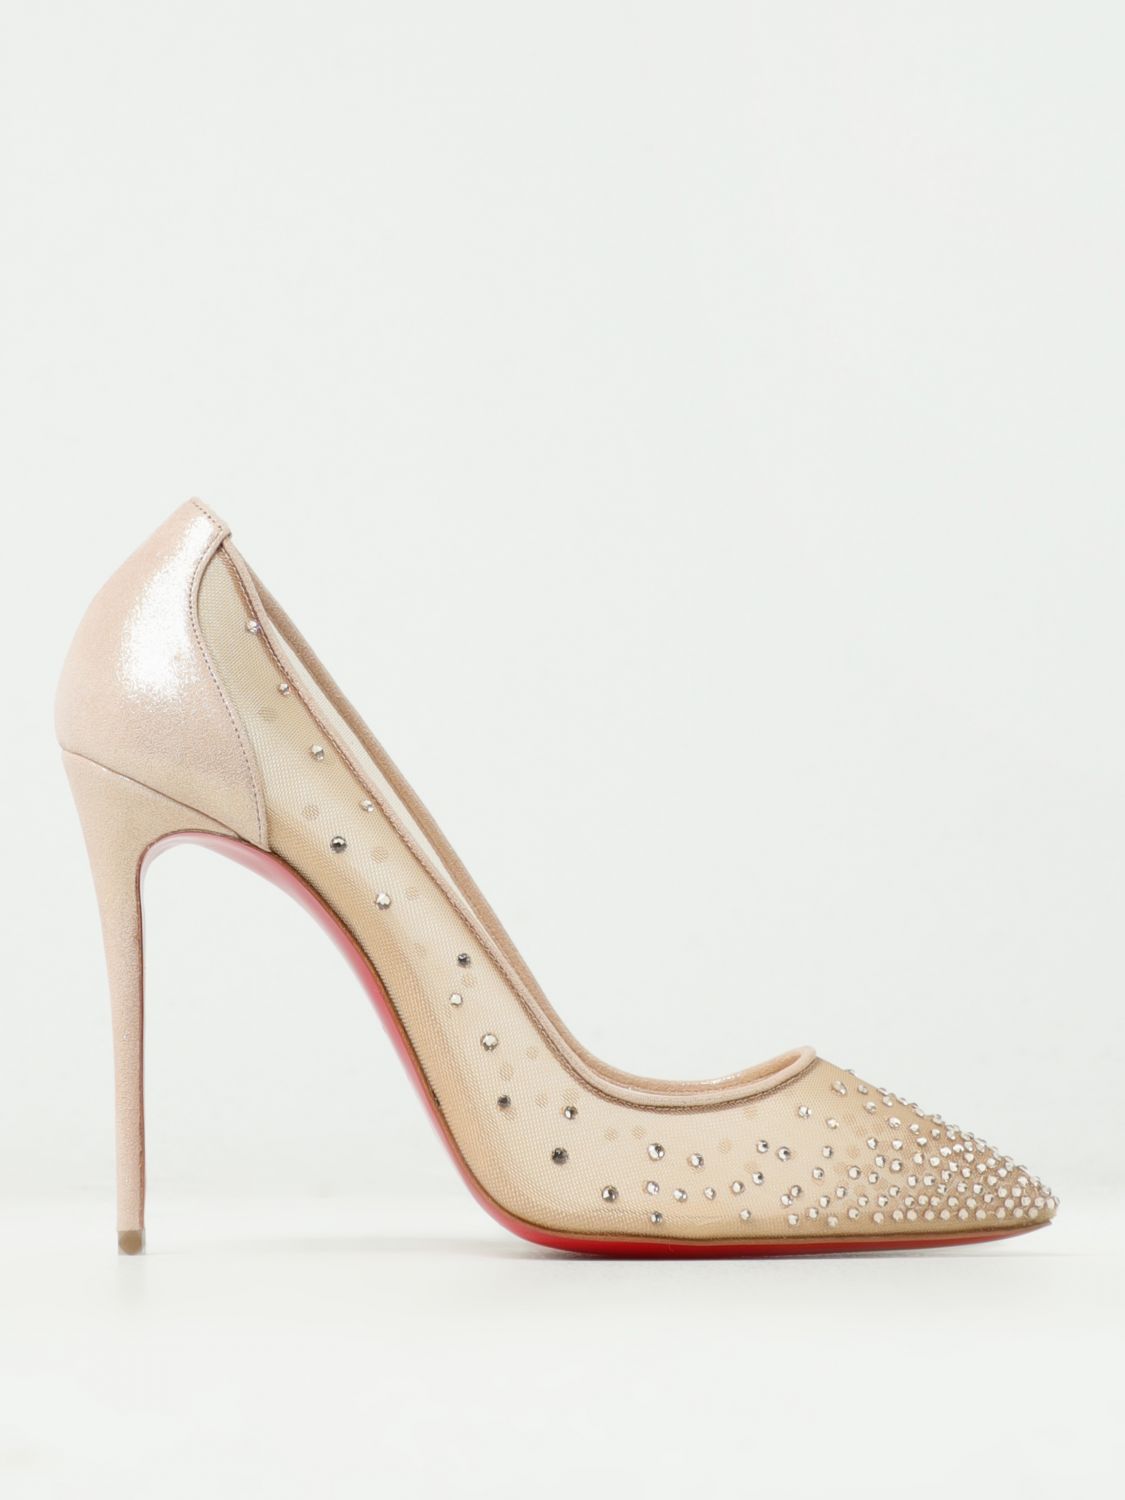 Shop Christian Louboutin Follies Strass Pumps In Mesh And Suede With Rhinestones In Nude